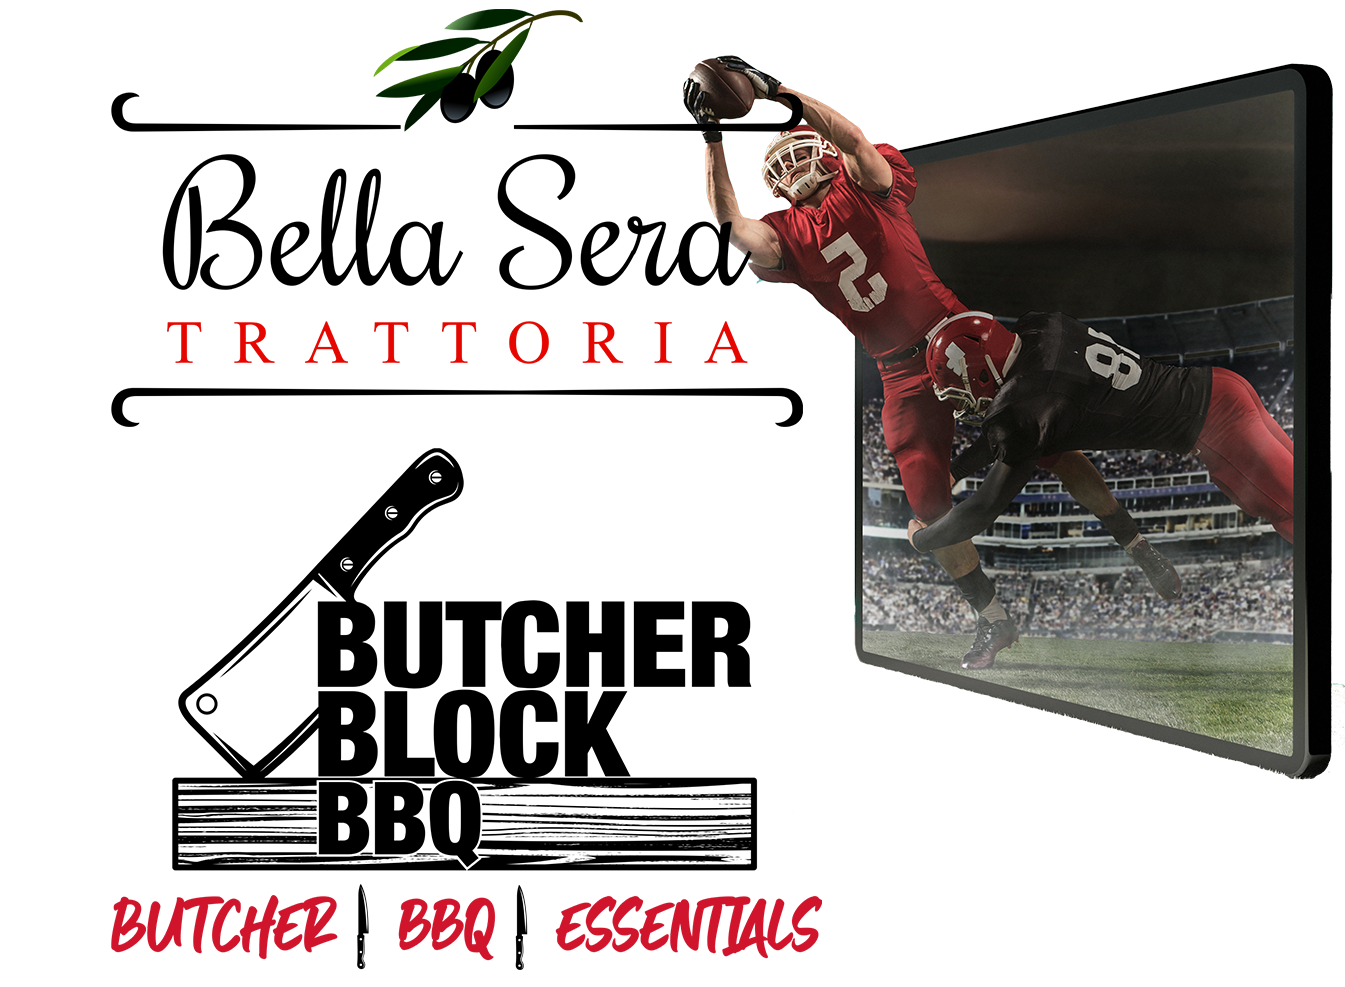 Bella Sera Trattoria and Butcher Block BBQ Logos together with football players playing.